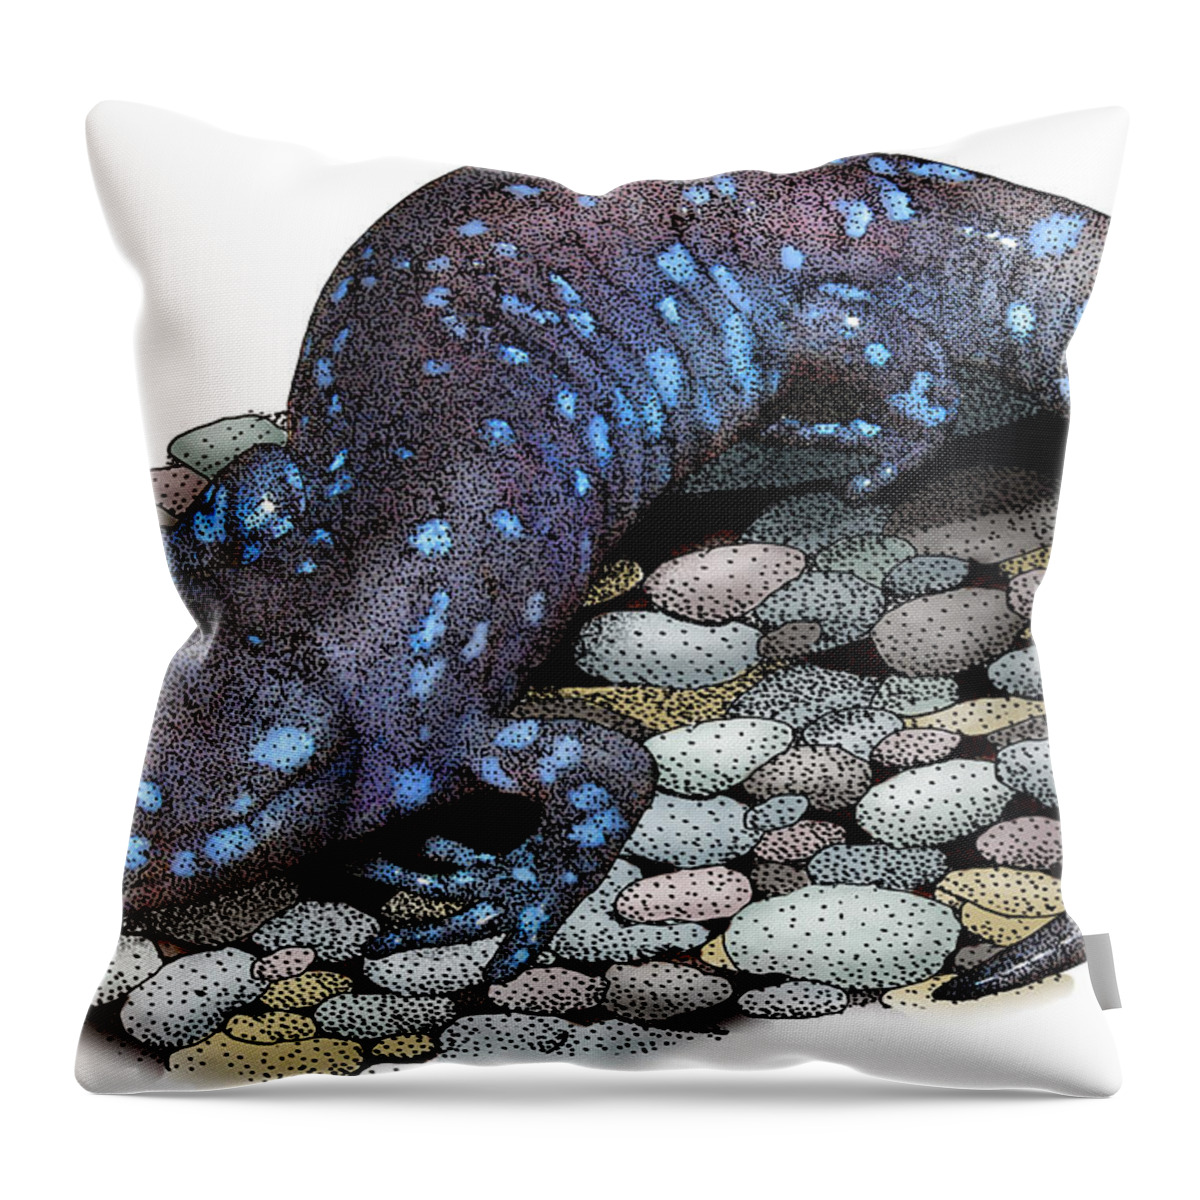 Blue-spotted Salamander Throw Pillow featuring the photograph Blue-spotted Salamander, Illustration by Roger Hall